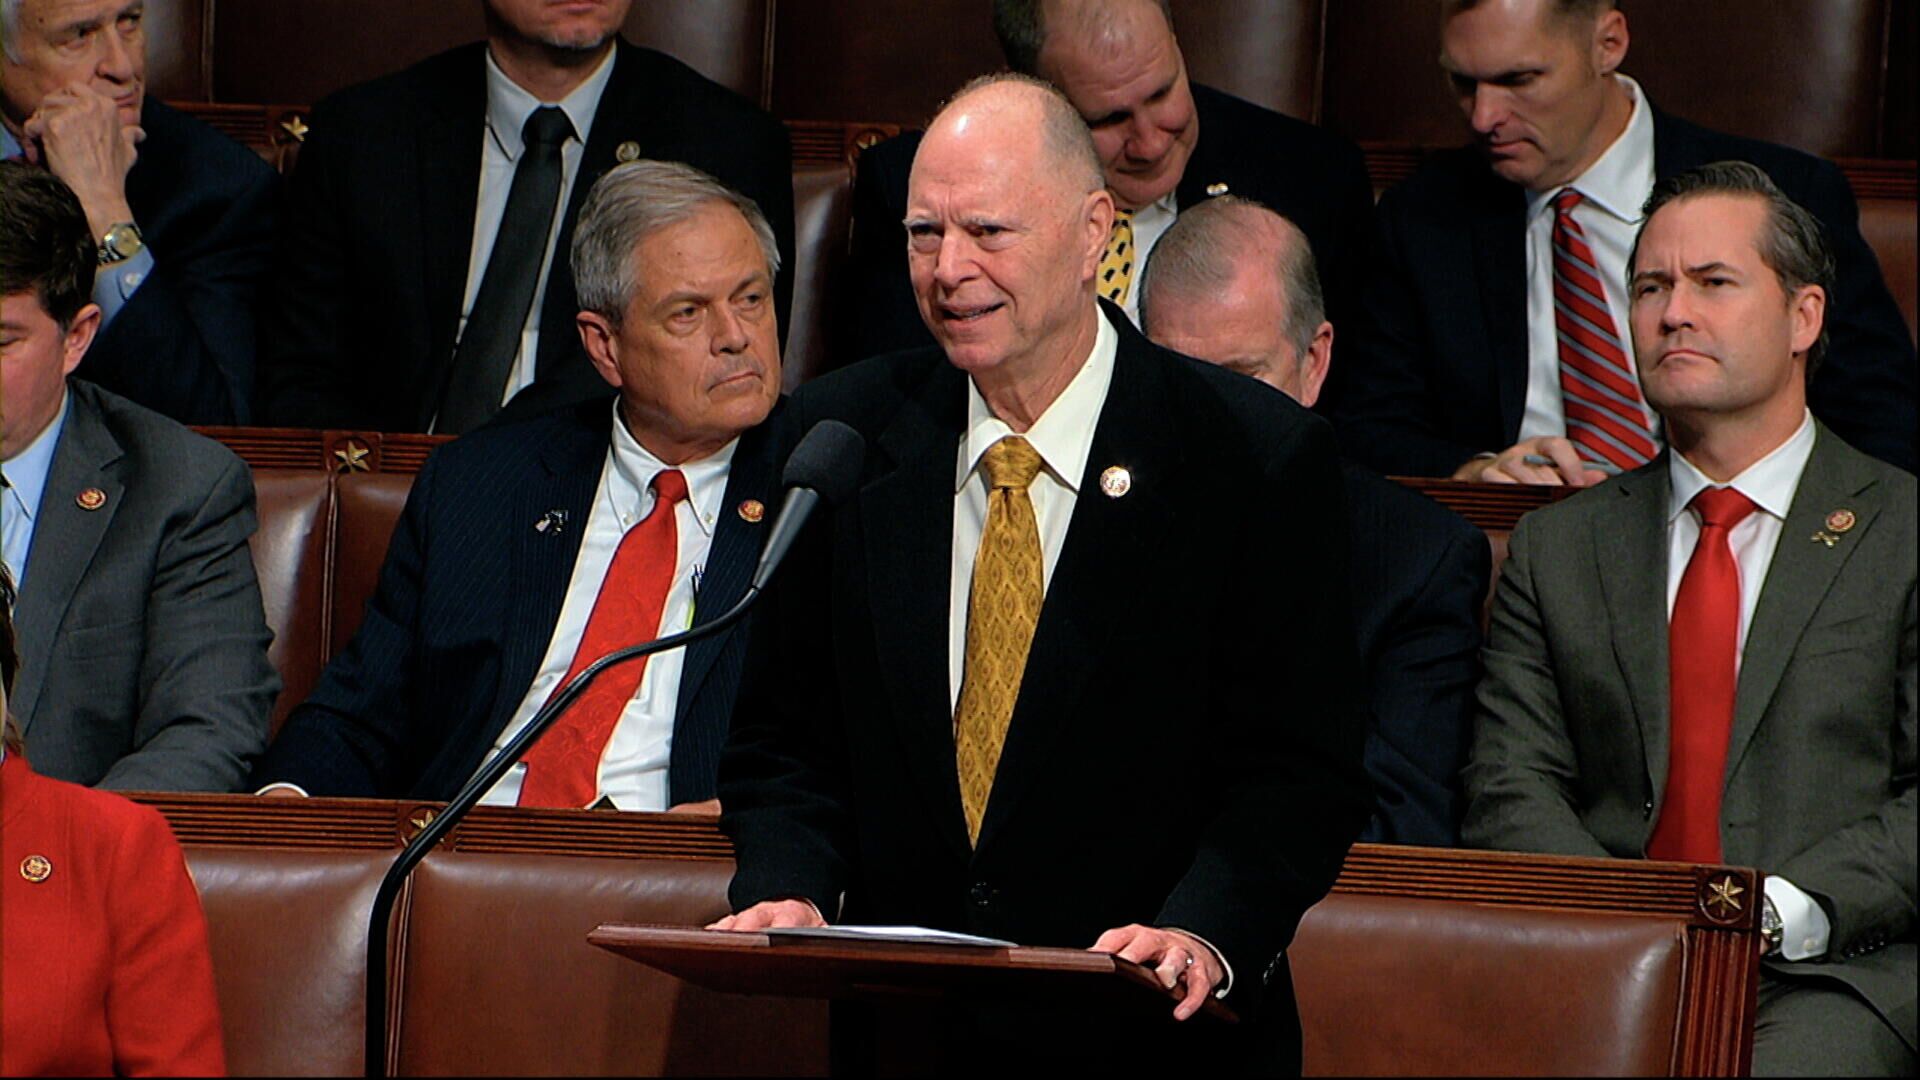 Rep. Bill Posey, R-Fla., speaks as the House of Representatives debates the articles of impeachment against President Donald Trump at the Capitol in Washington, Wednesday, Dec. 18, 2019. - Sputnik International, 1920, 22.10.2021